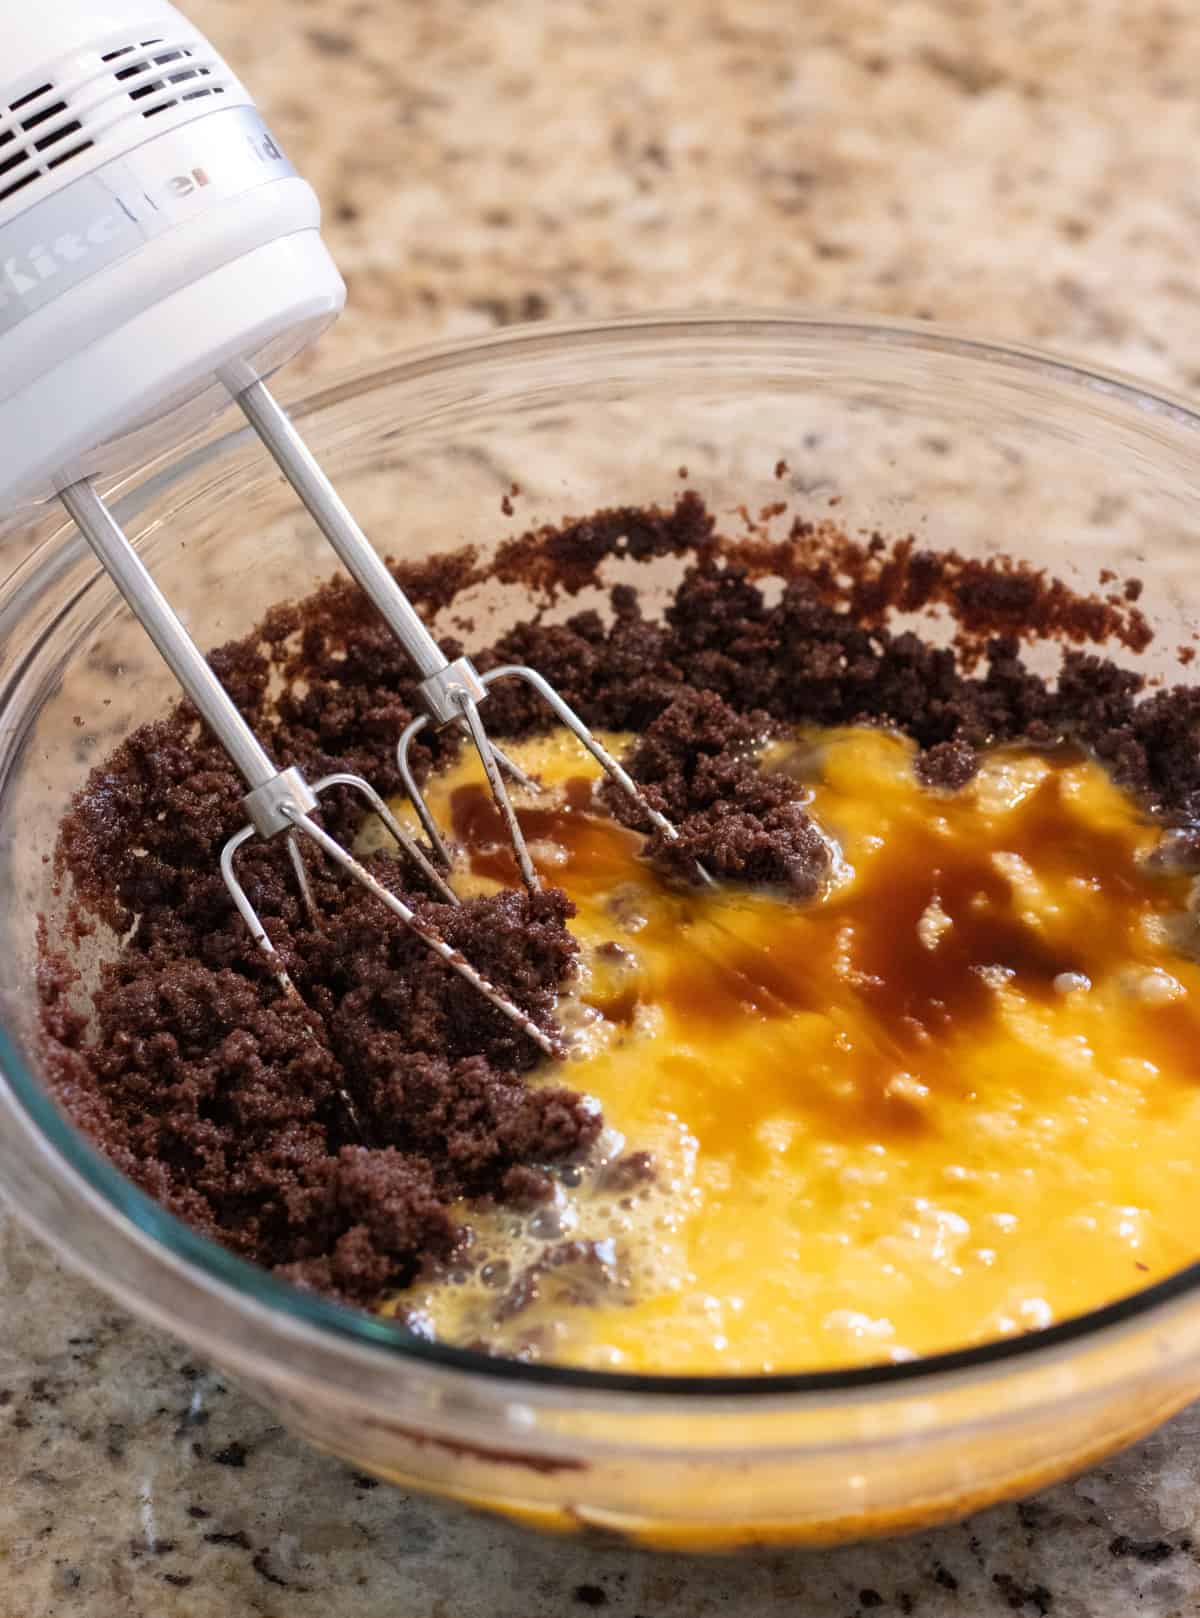 Eggs and vanilla added to brownie batter.